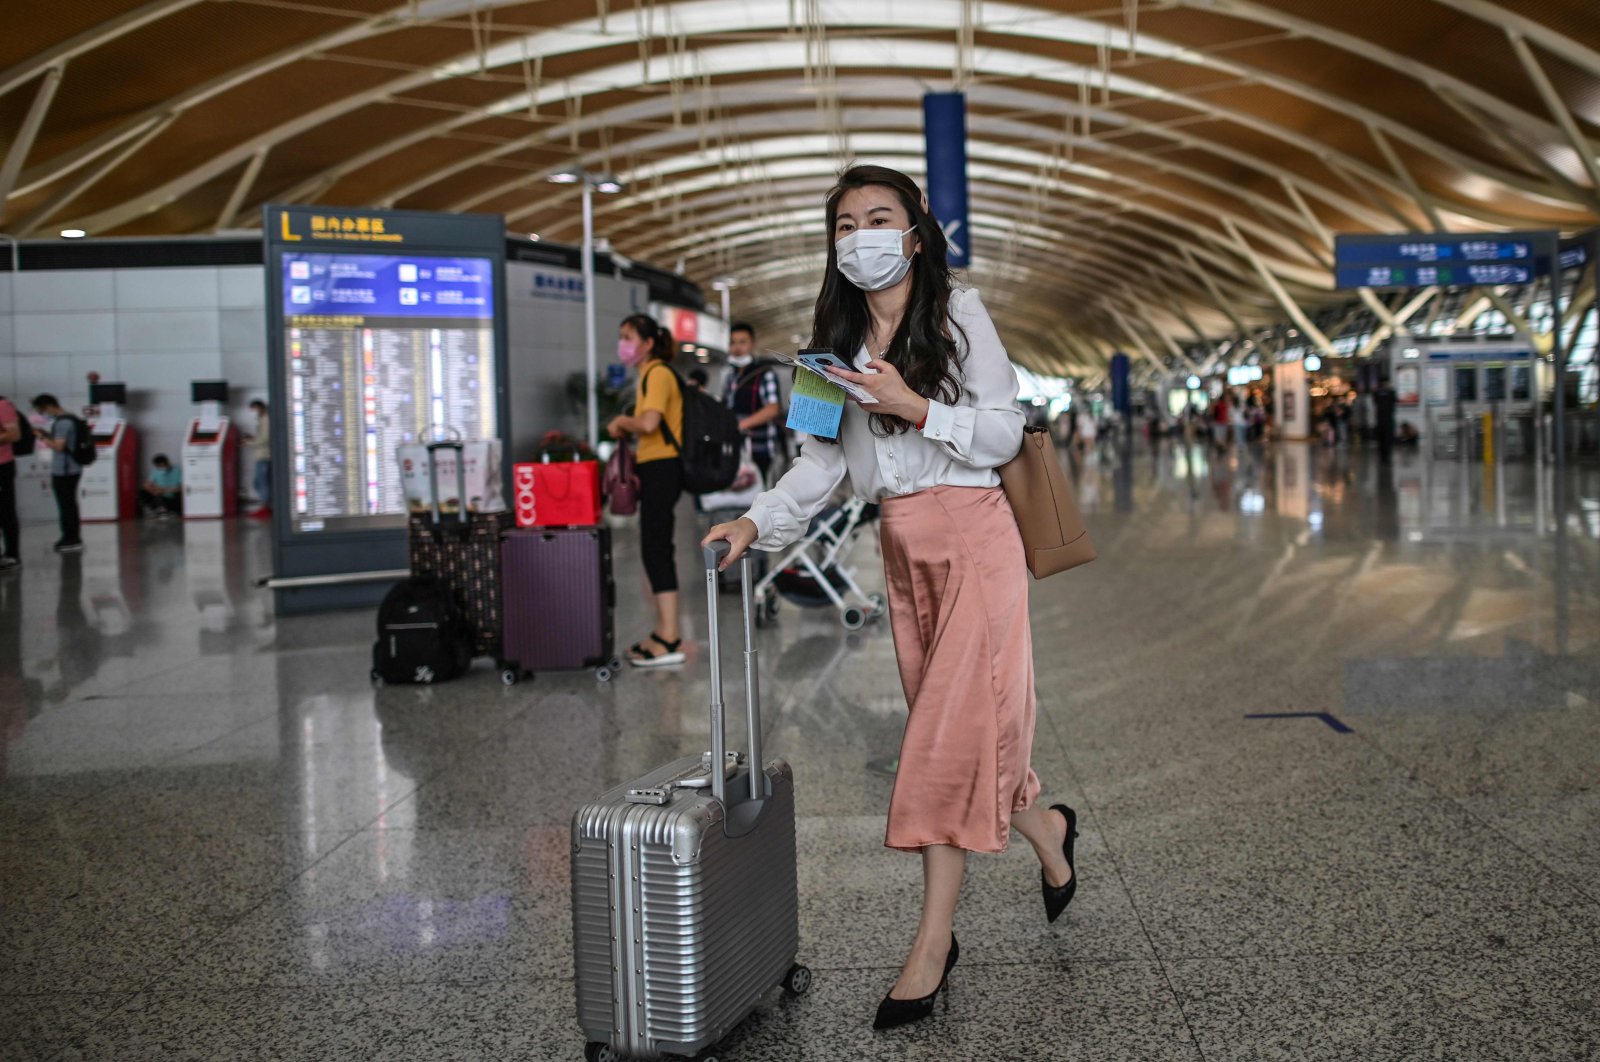 Passengers wearing face masks walk across a hall following preventive procedures against the spread of the coronavirus in Pudong International Airport in Shanghai, China, June 11, 2020. (AFP Photo)